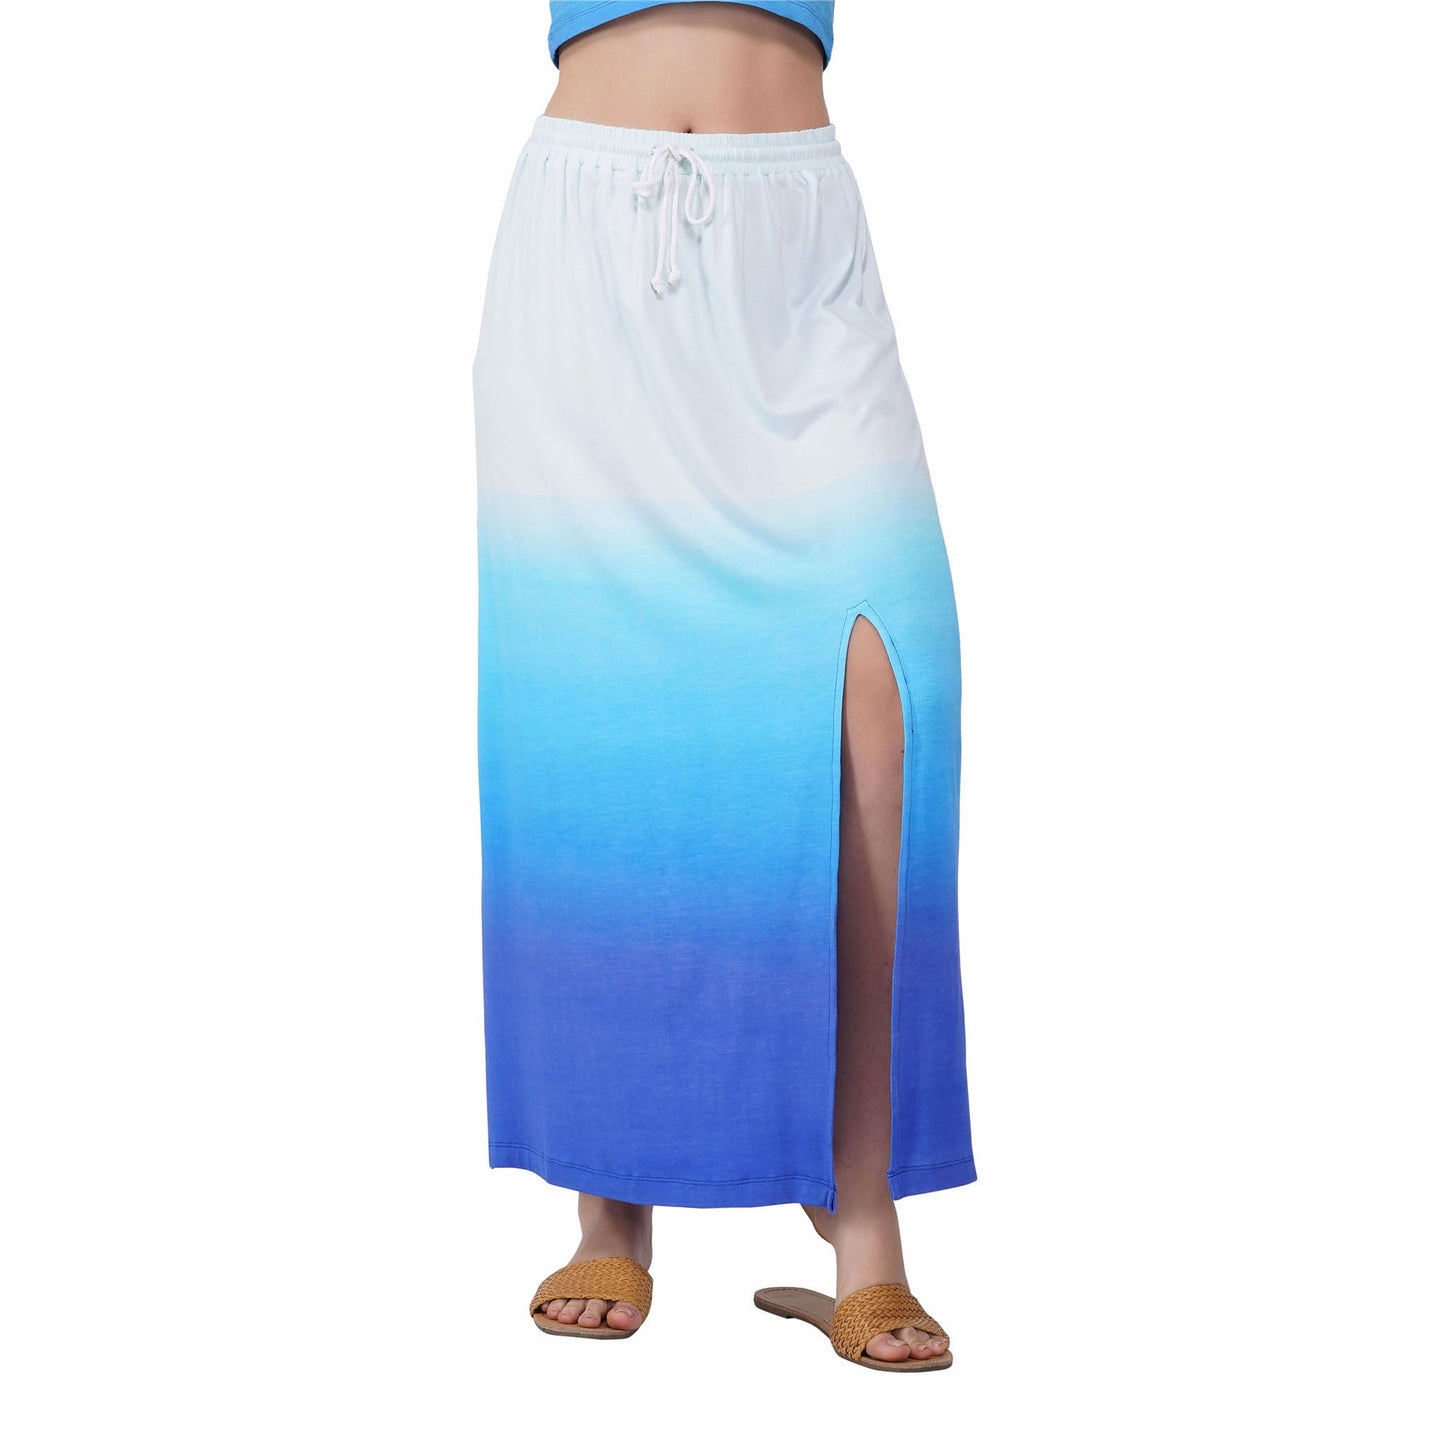 SLAY. Women's White to Blue Ombre Skirt with Slit